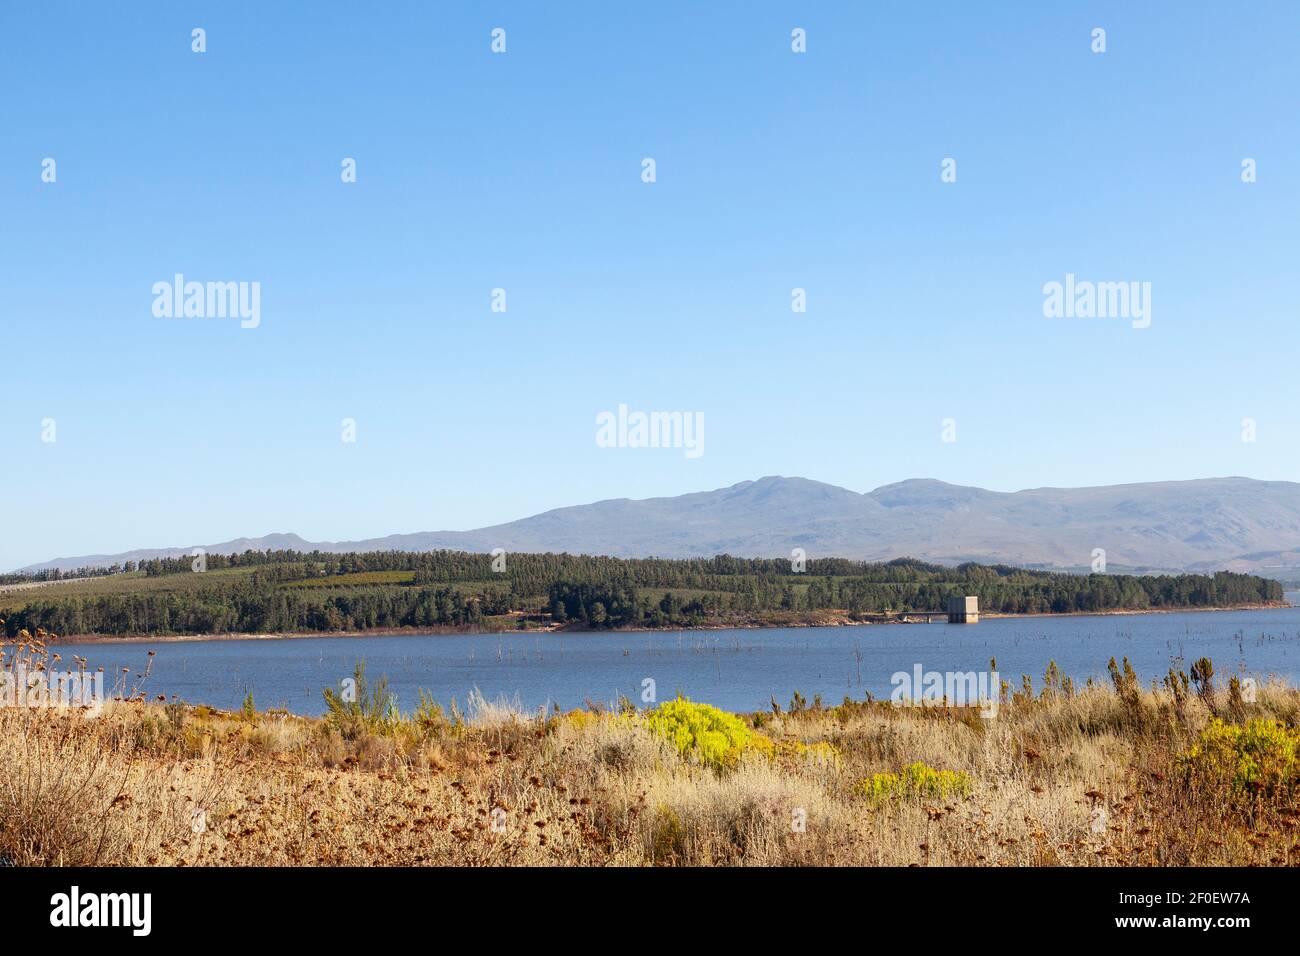 Theewaterskloof Dam near Villiersdorp, Western Cape, South Africa which supplies Cape Town with water. Stock Photo